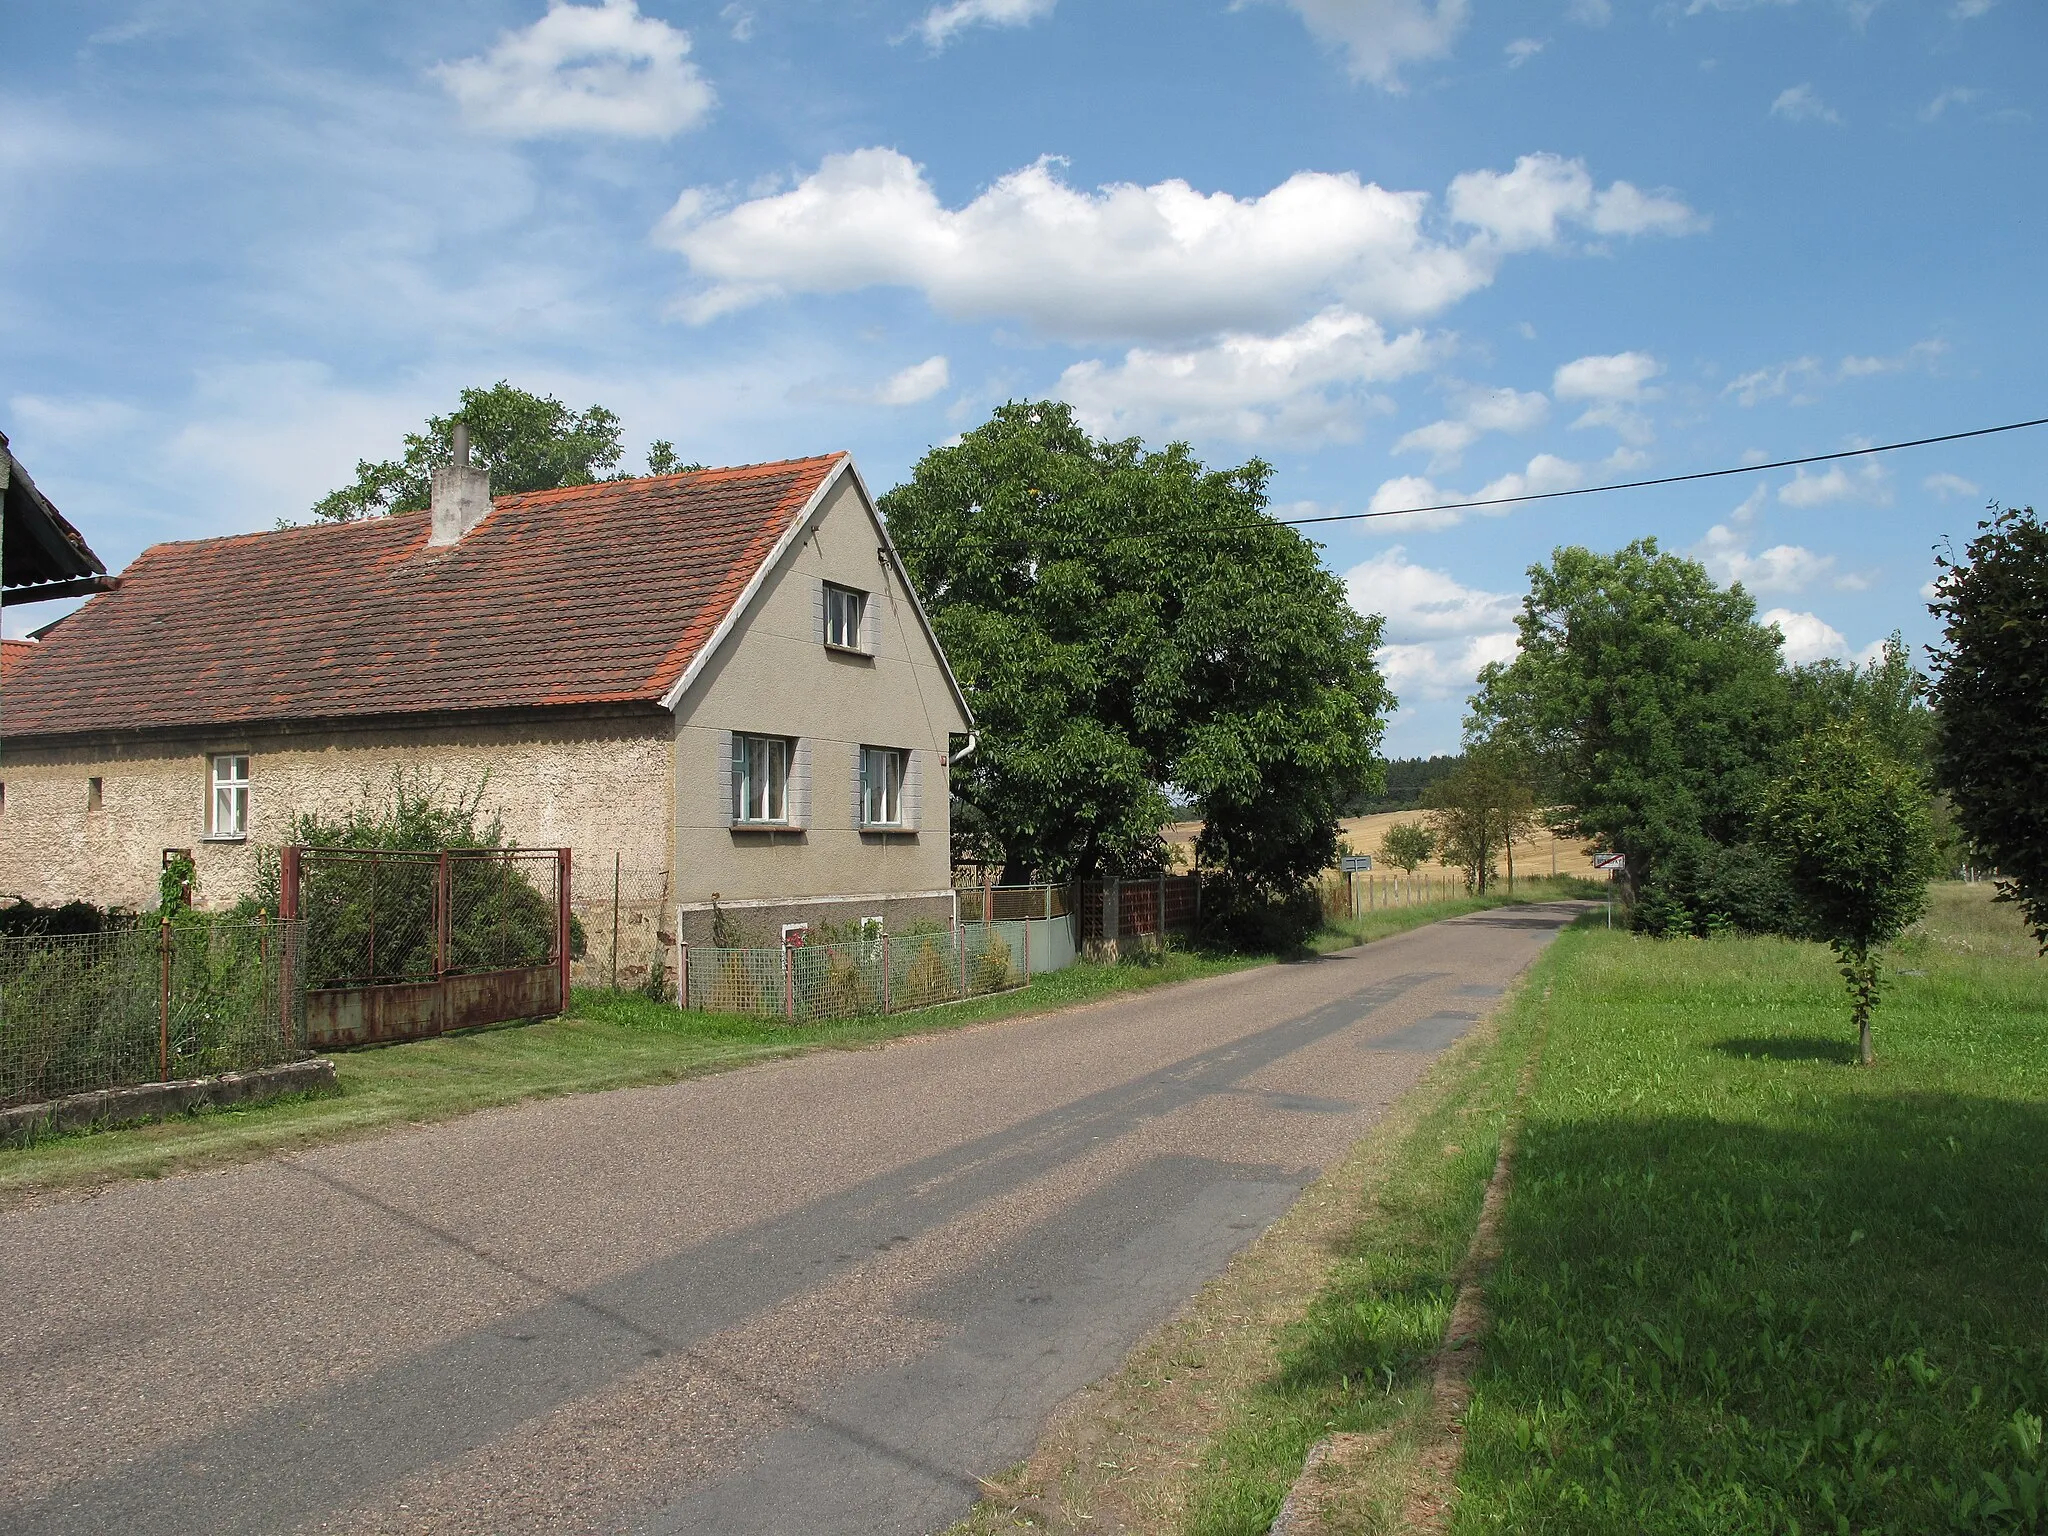 Photo showing: Cottage by road in Biskoupky, Rokycany District, Czech Republic.